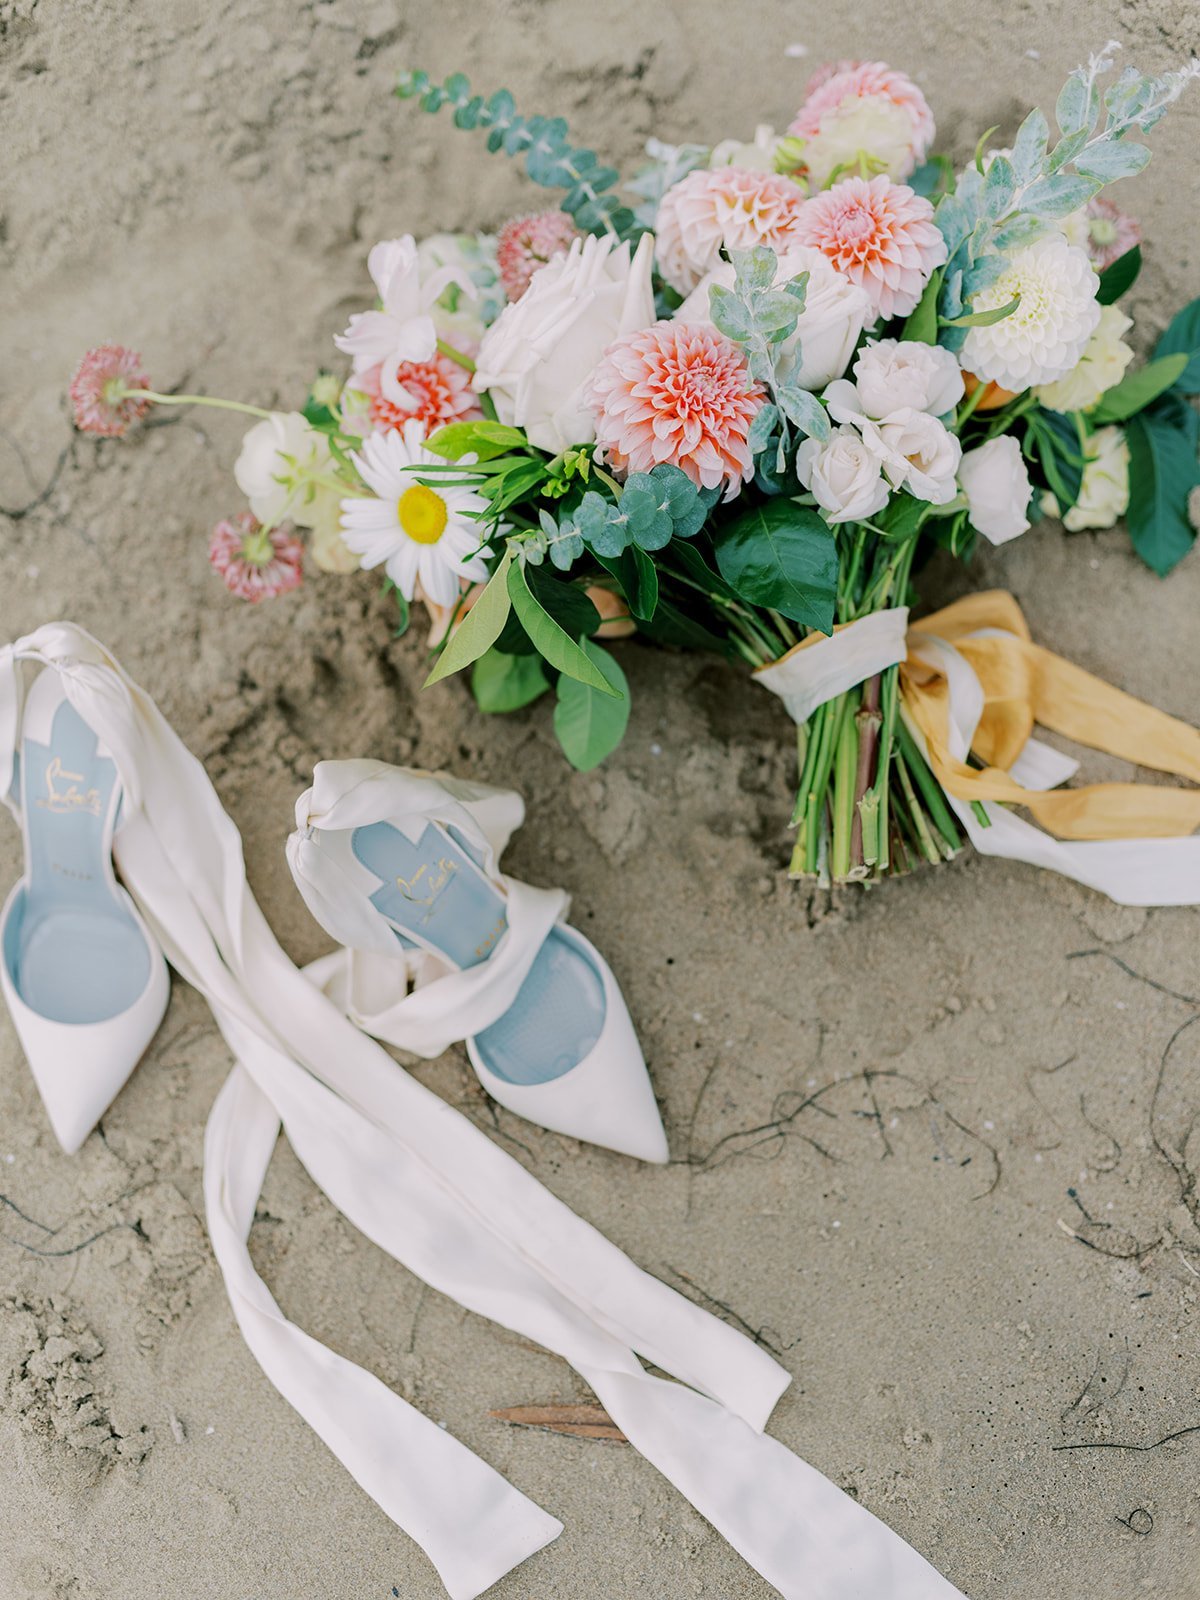 www.santabarbarawedding.com | Kelsey Rae Designs | Dani Toscano | Alexis Ireland Florals | Christian Louboutin | Bride’s Shoes and Bouquet in the Sand